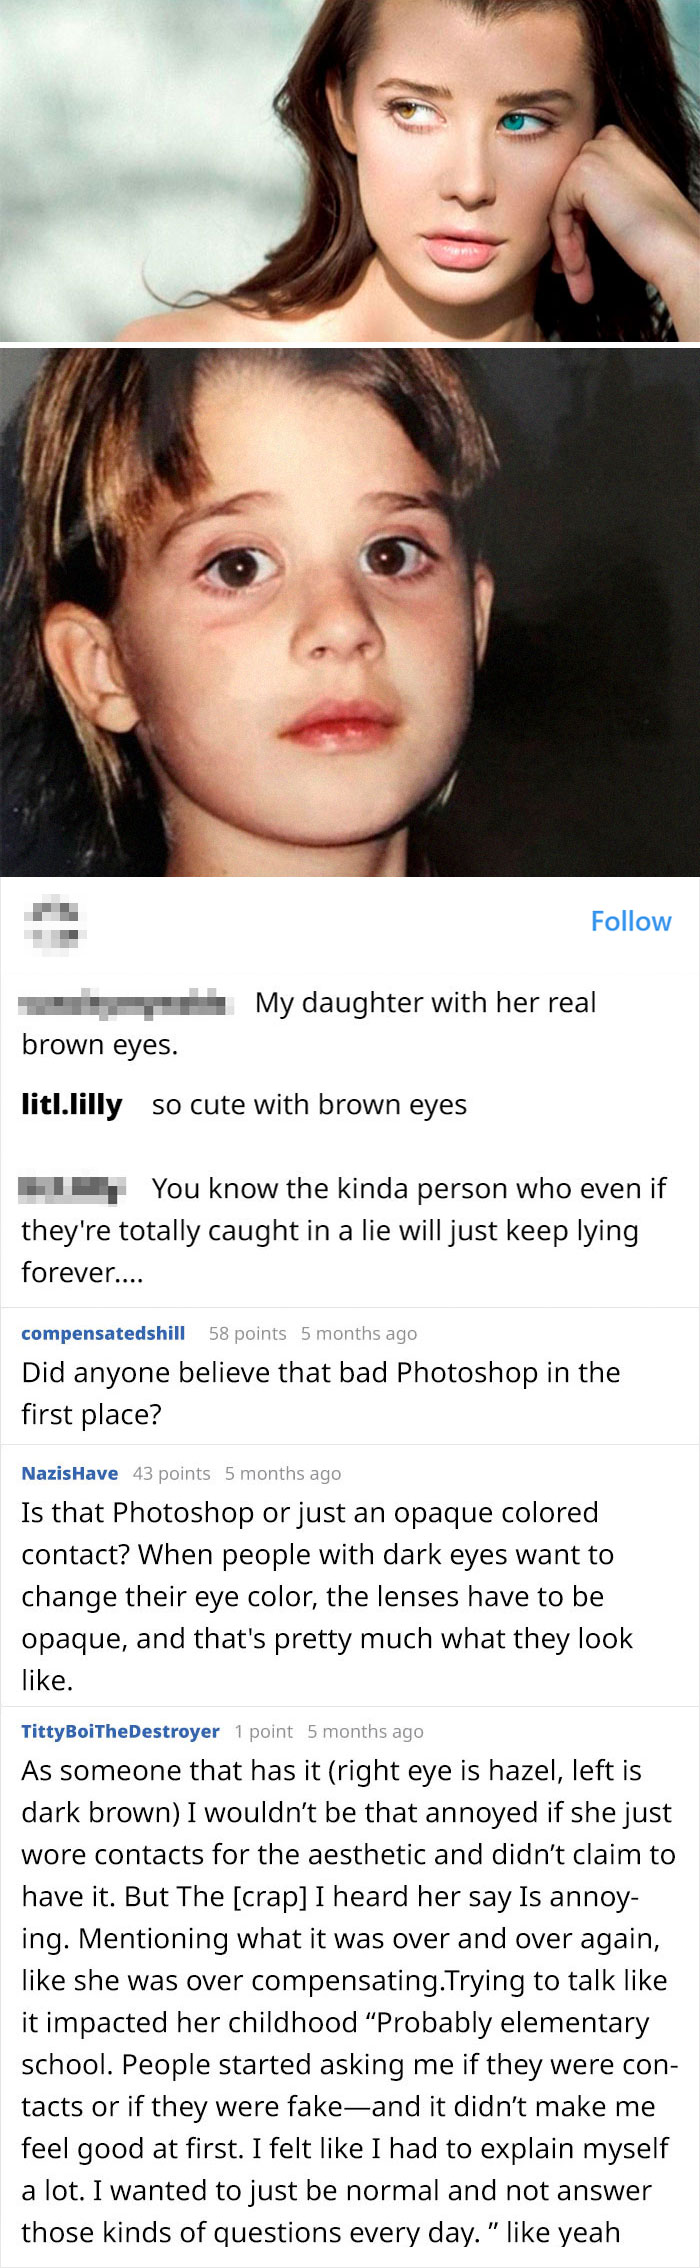 Instagram "Influencer" Called Out By Her Own Dad For Claiming To Have Heterochromia